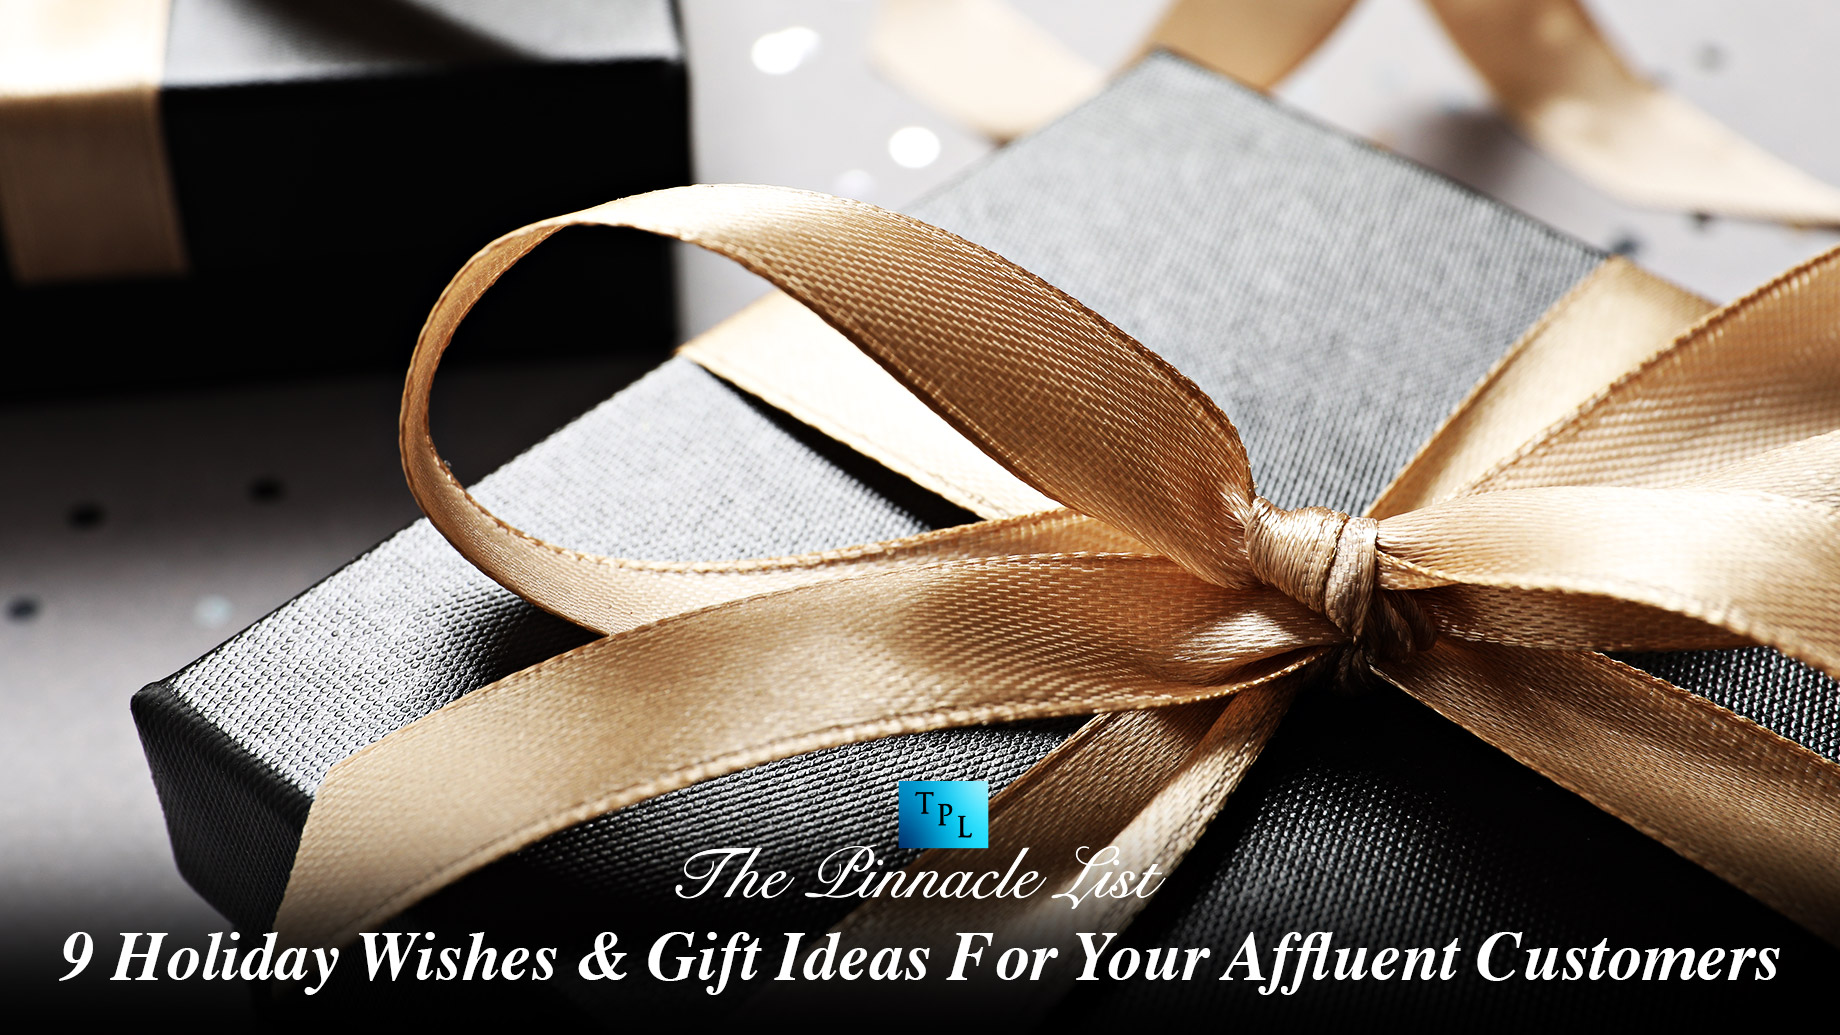 9 Holiday Wishes & Gift Ideas For Your Affluent Customers